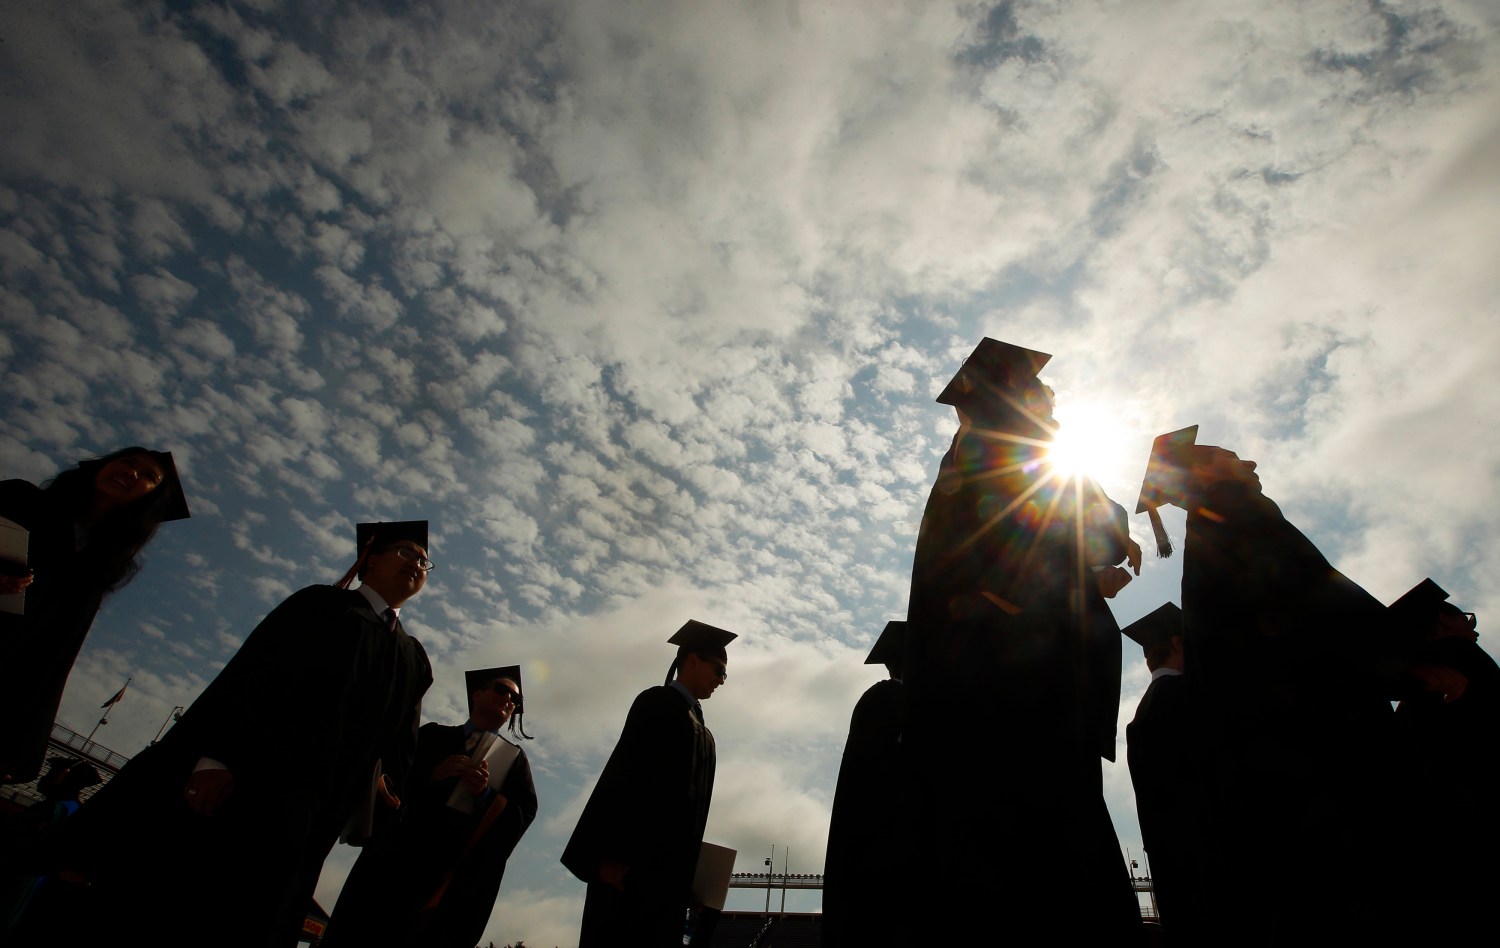 Graduating students arrive for Commencement Exercises at Boston College in Boston, Massachusetts, U.S. on May 20, 2013.